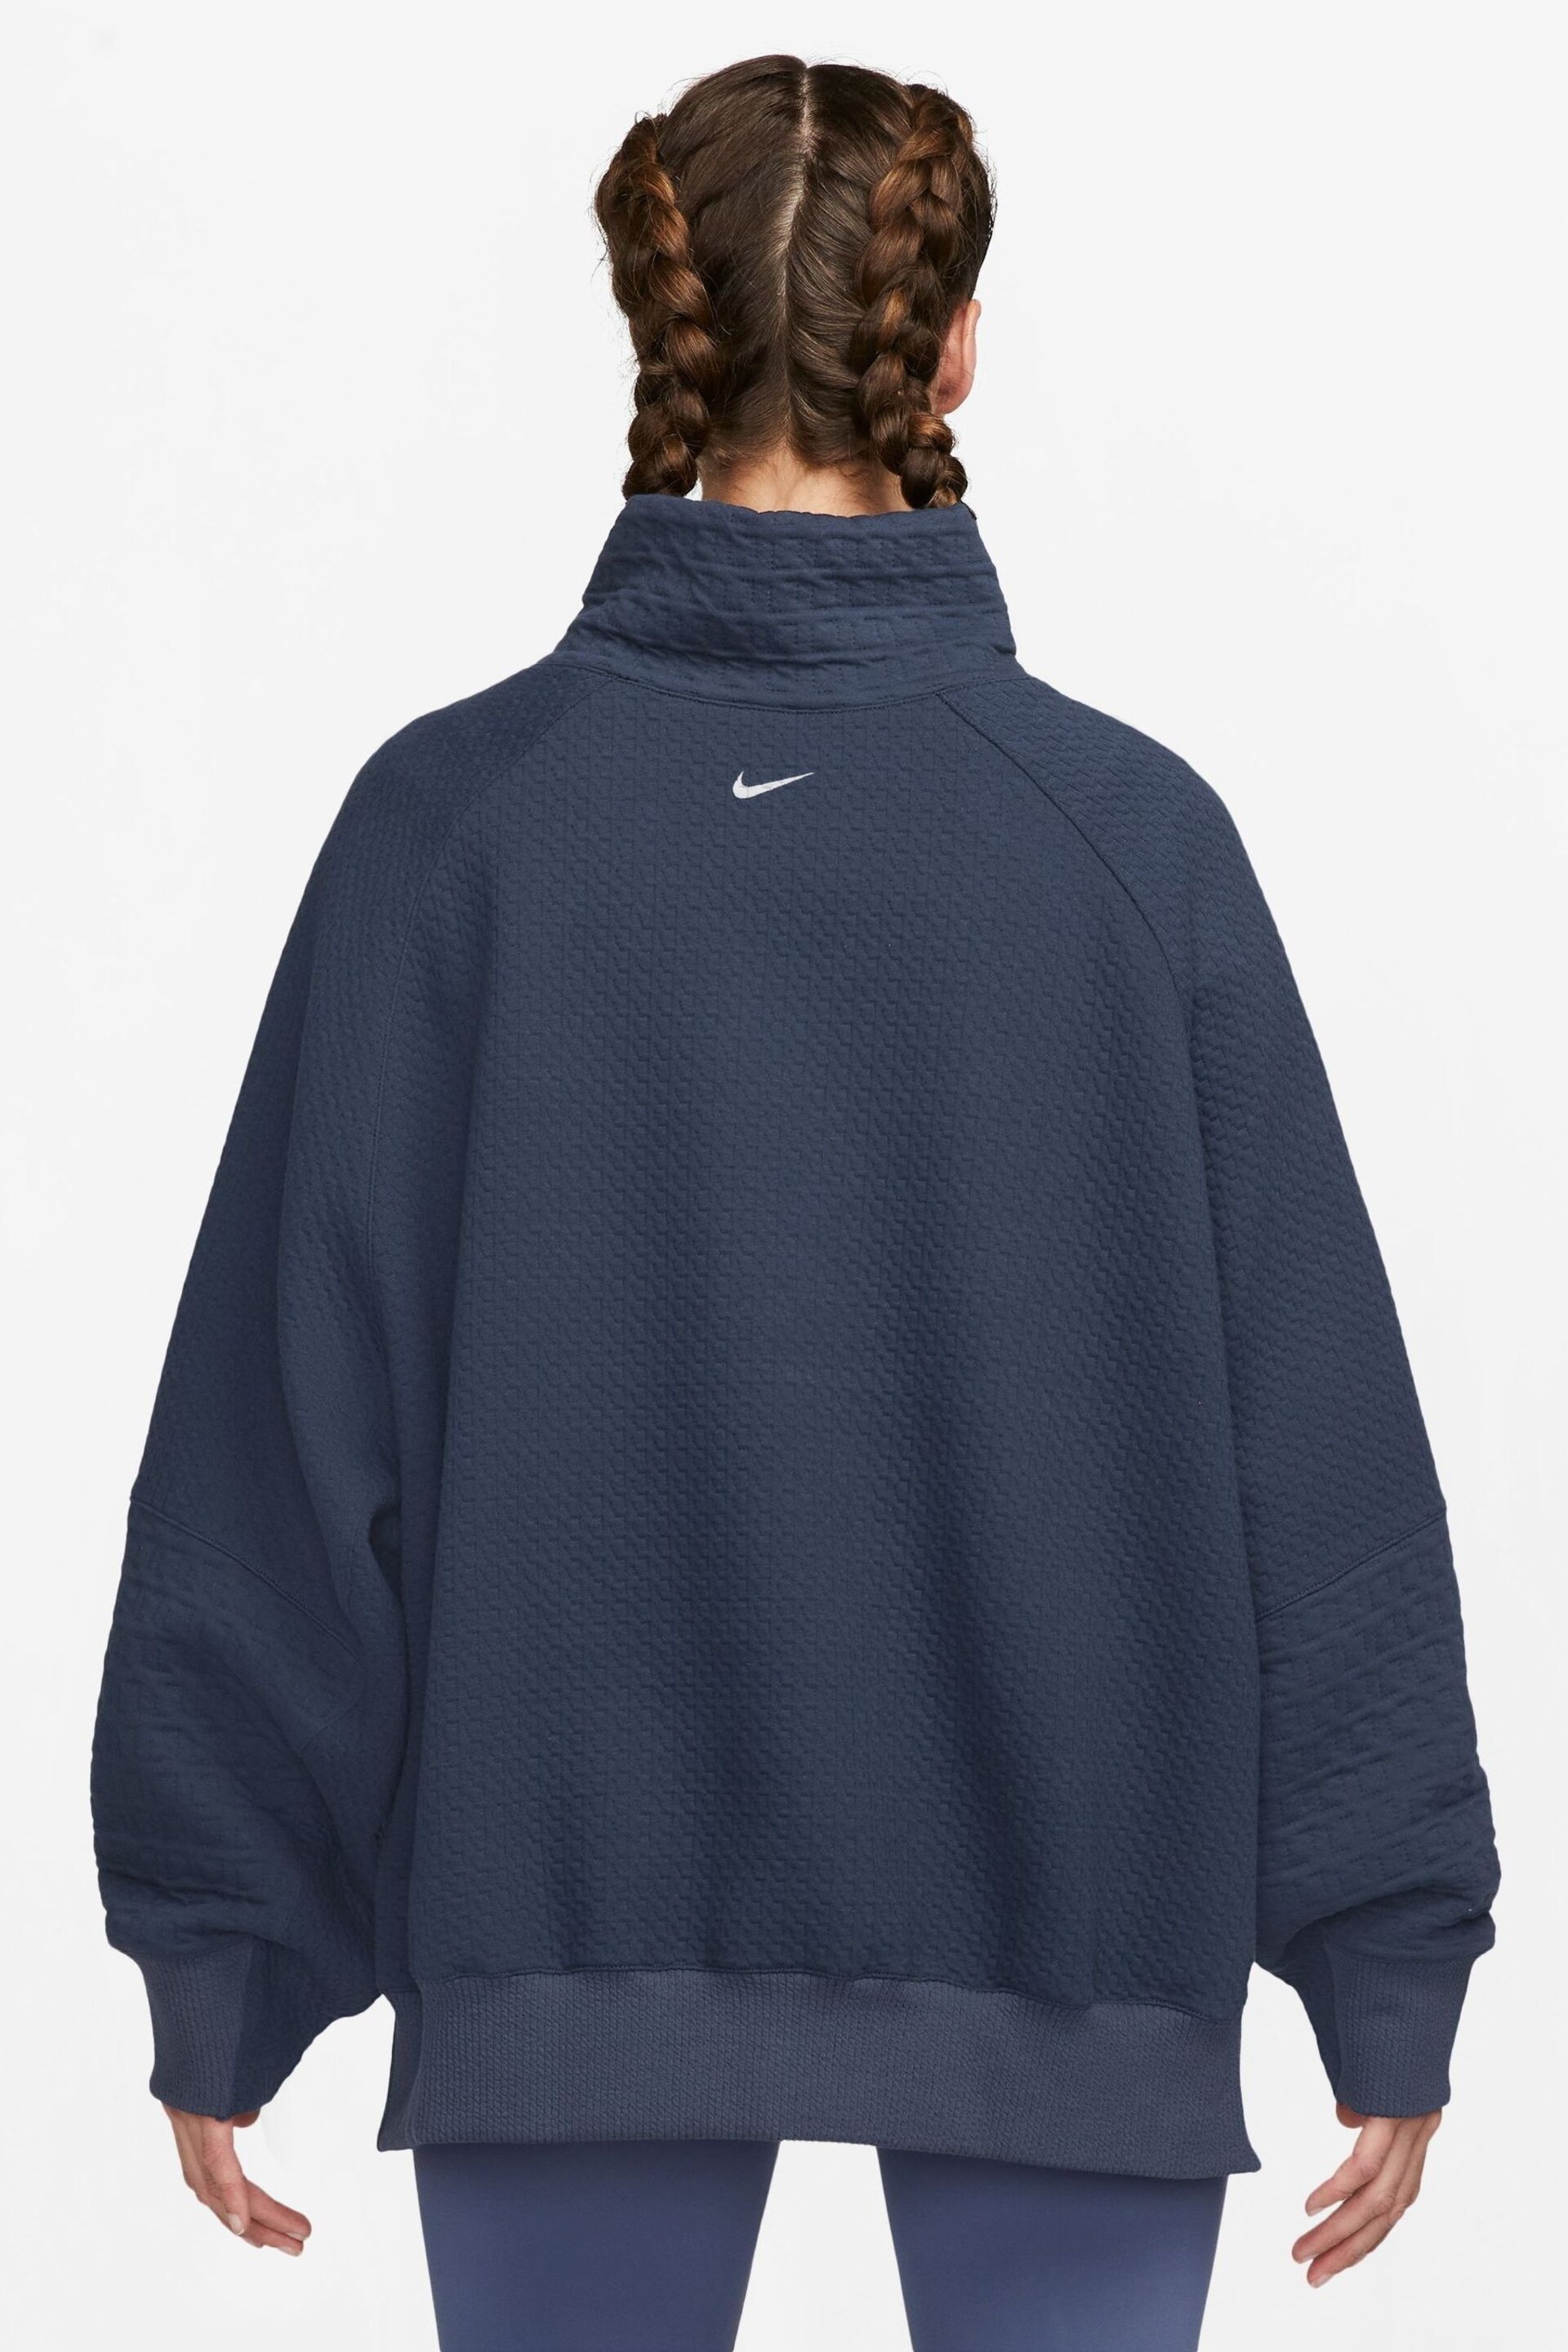 Nike Blue Therma-FIT Mock Neck Fleece Top - Image 2 of 3